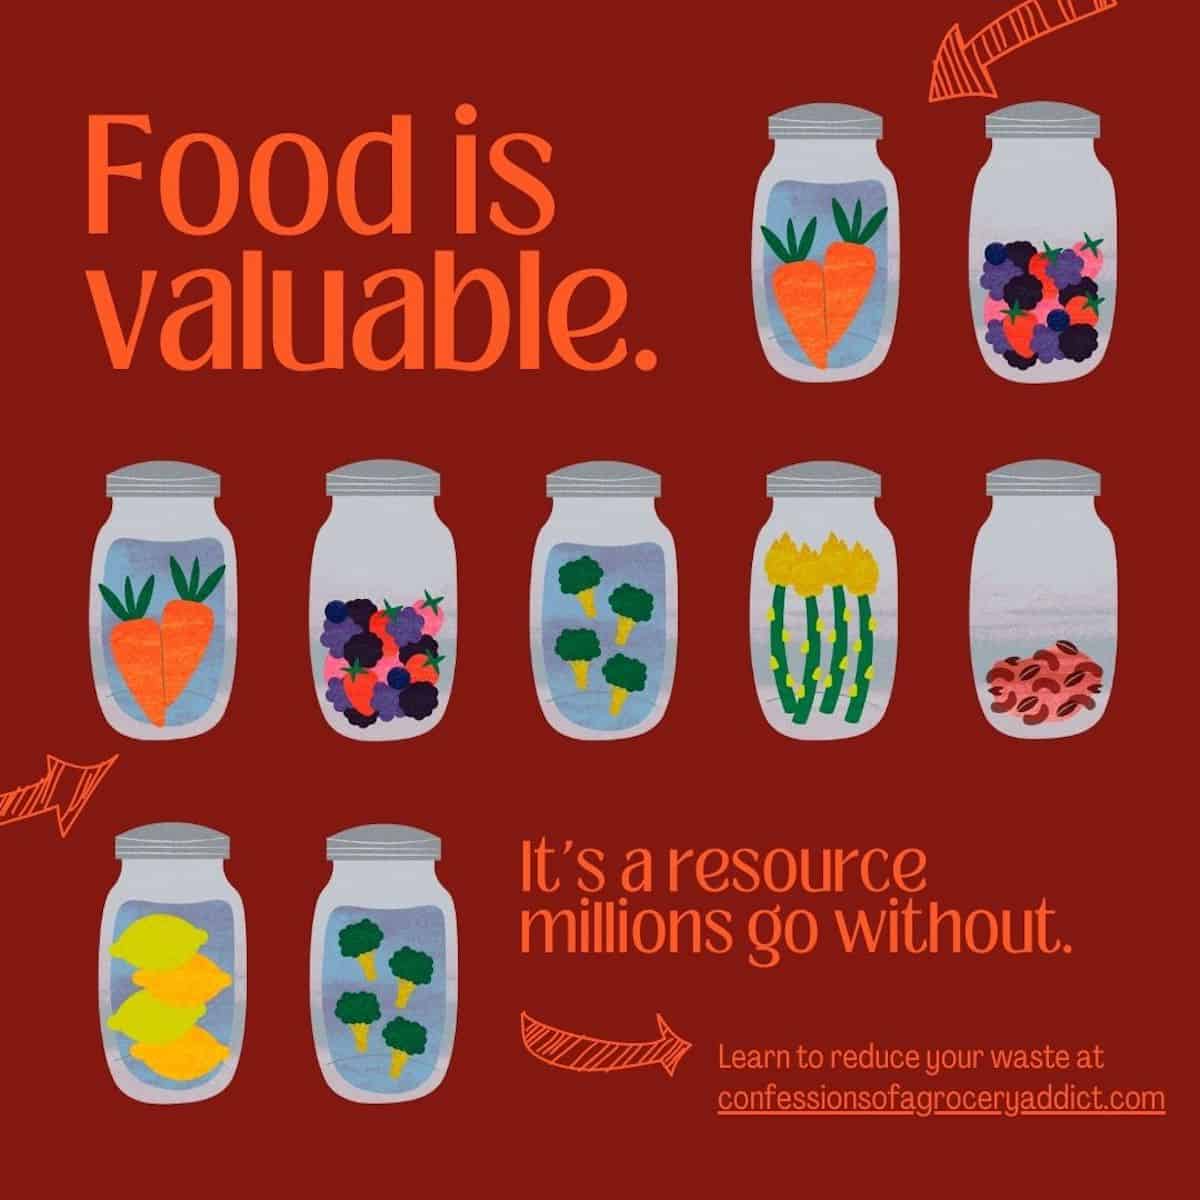 square red image with cartoons of food in jars and text overlay that reads "food is valuable; it's a resource millions go without; learn to reduce your waste at confessions of a grocery addict dot com.